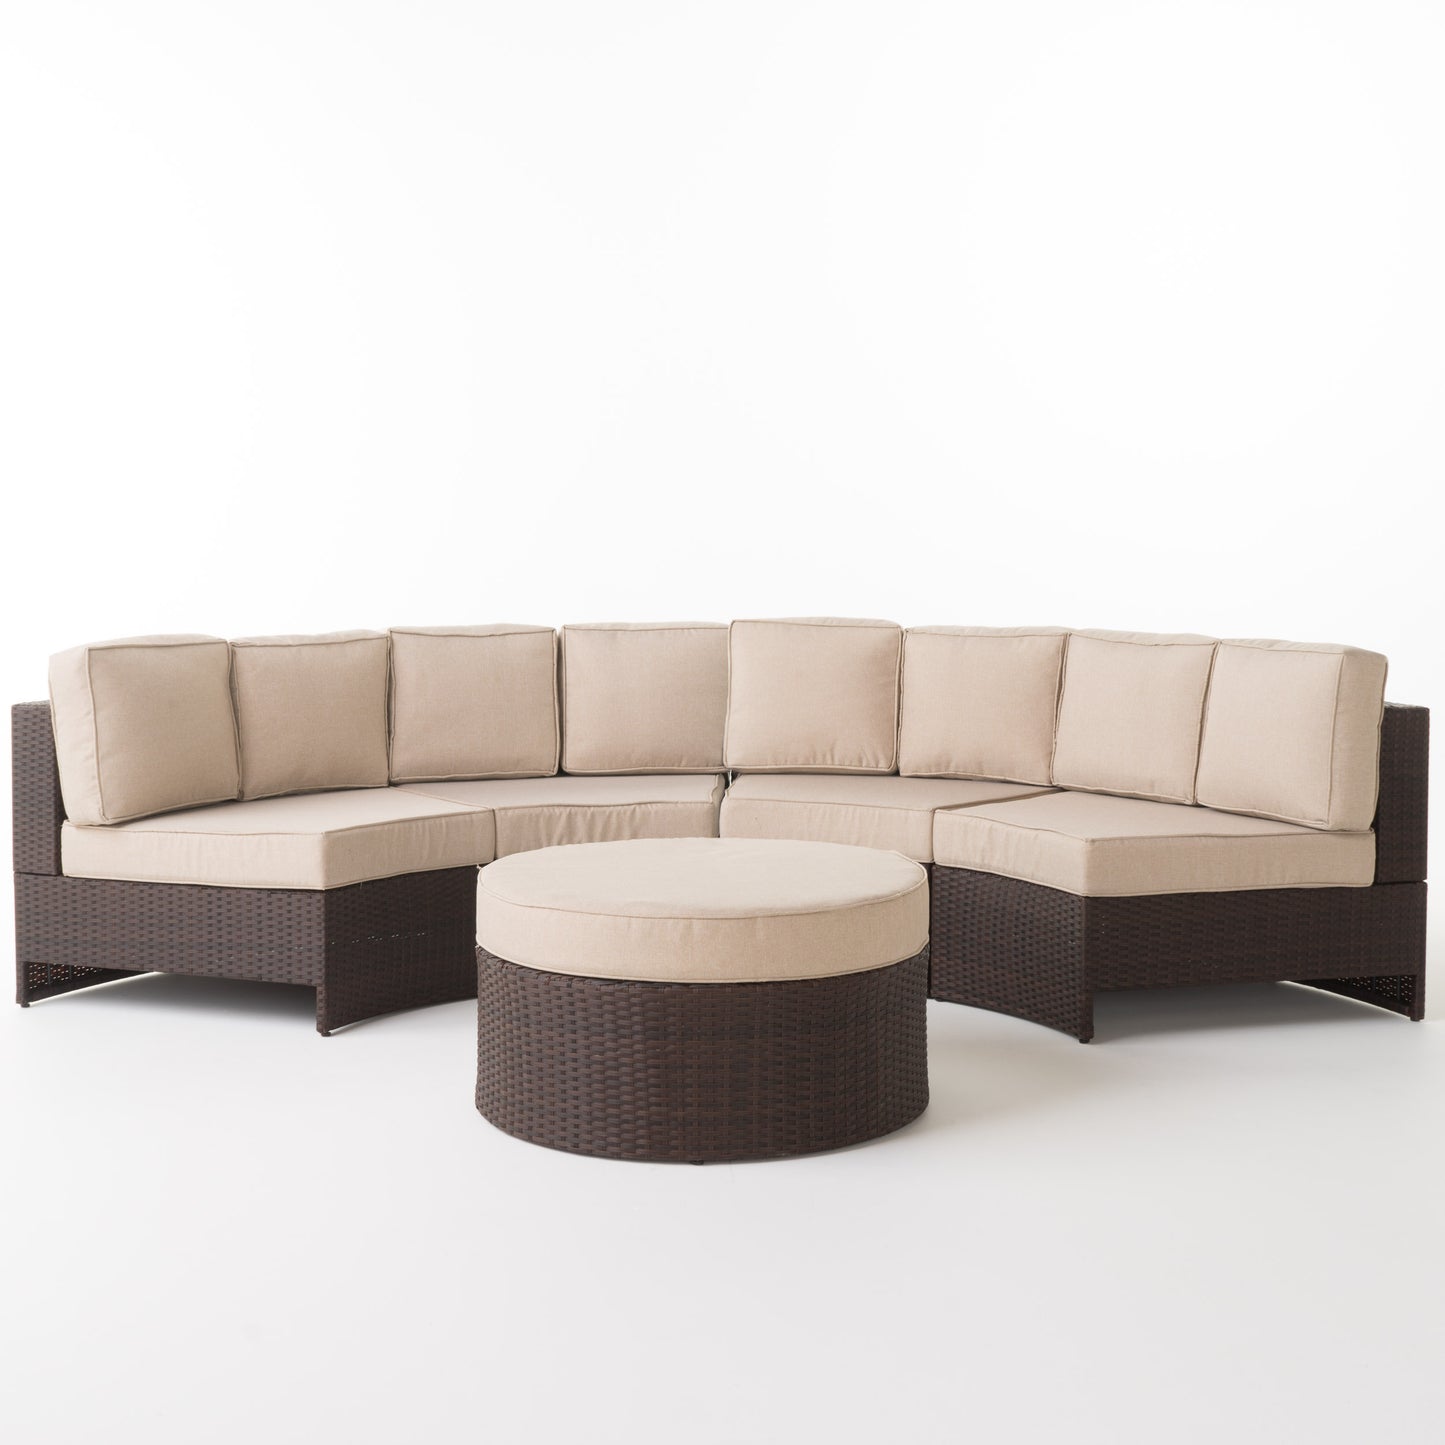 Riviera 5pc Outdoor Sectional Sofa Set